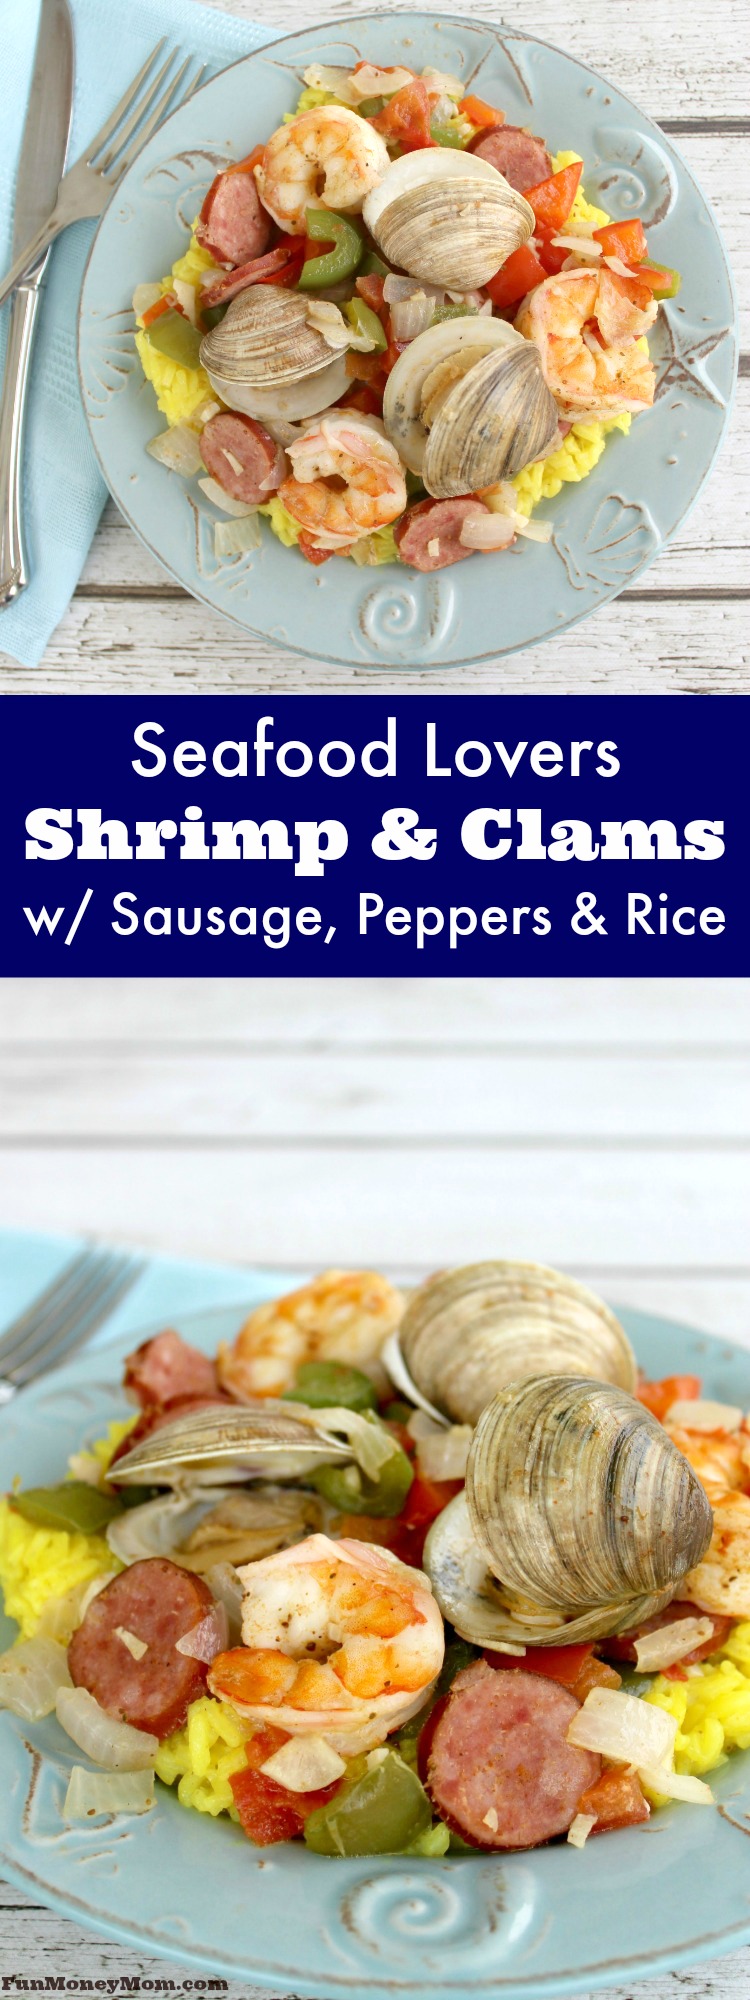 Love fresh seafood? You won't be able to get enough of this delicious shrimp & clams over rice. This seafood recipe is my new favorite dinner!